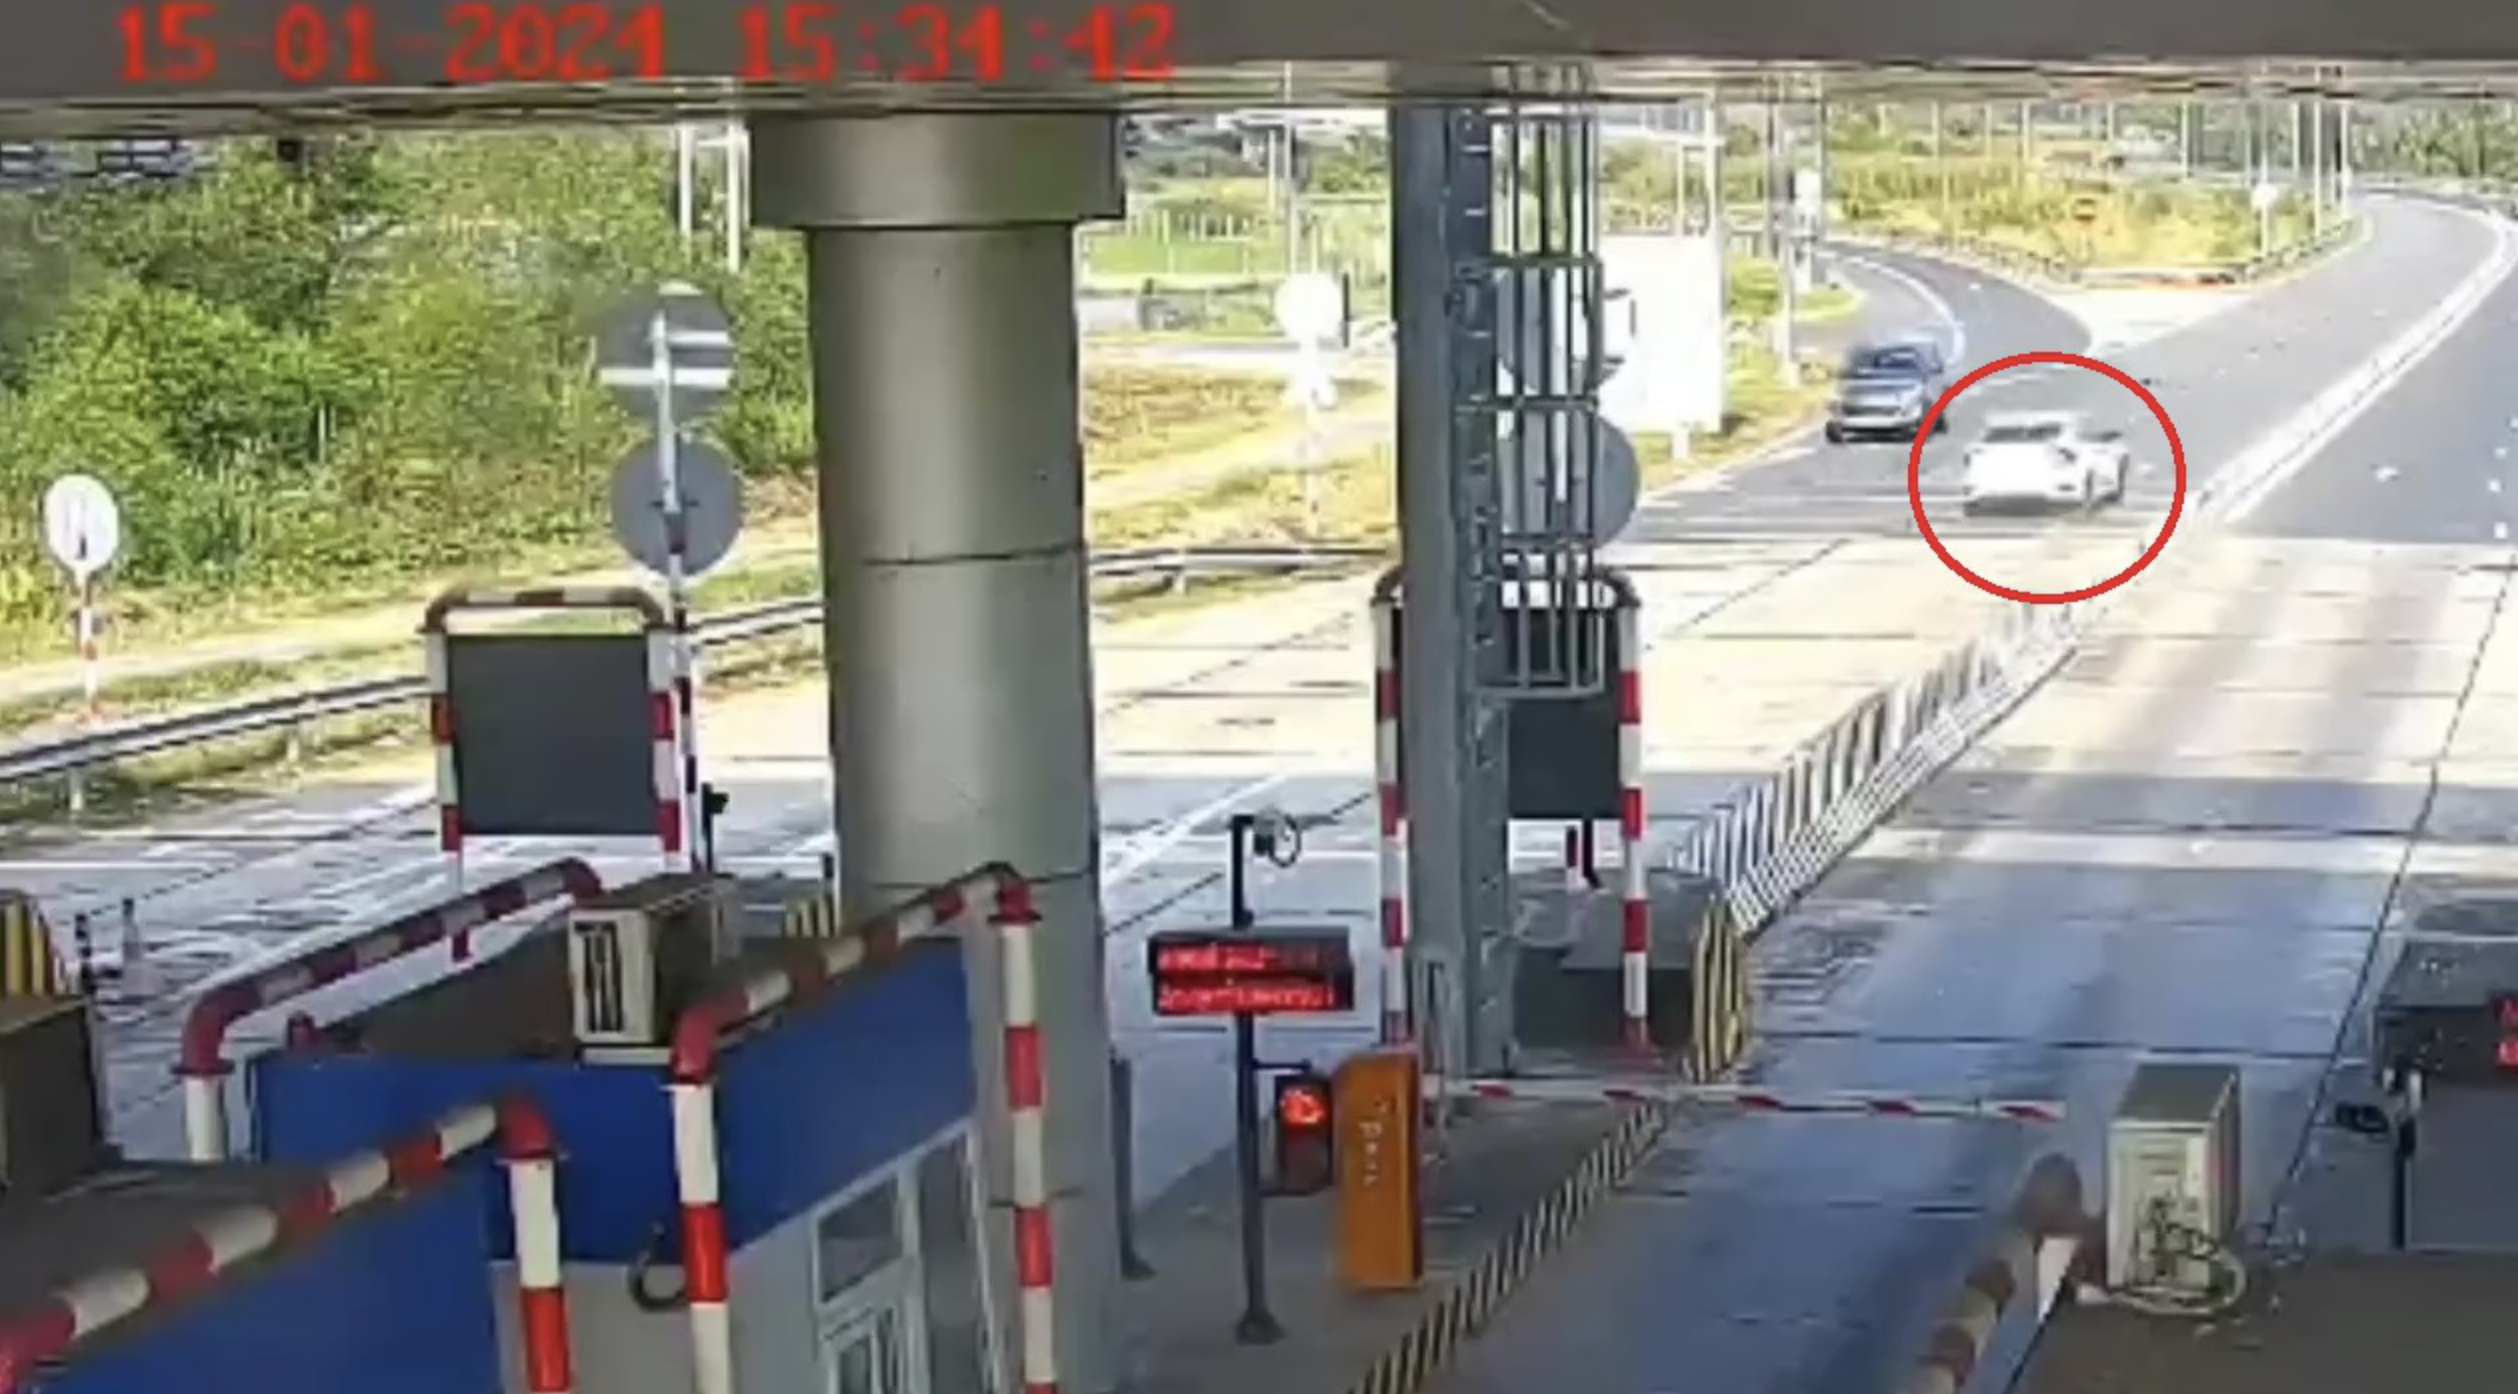 Vietnamese man drives in wrong direction to avoid toll fee